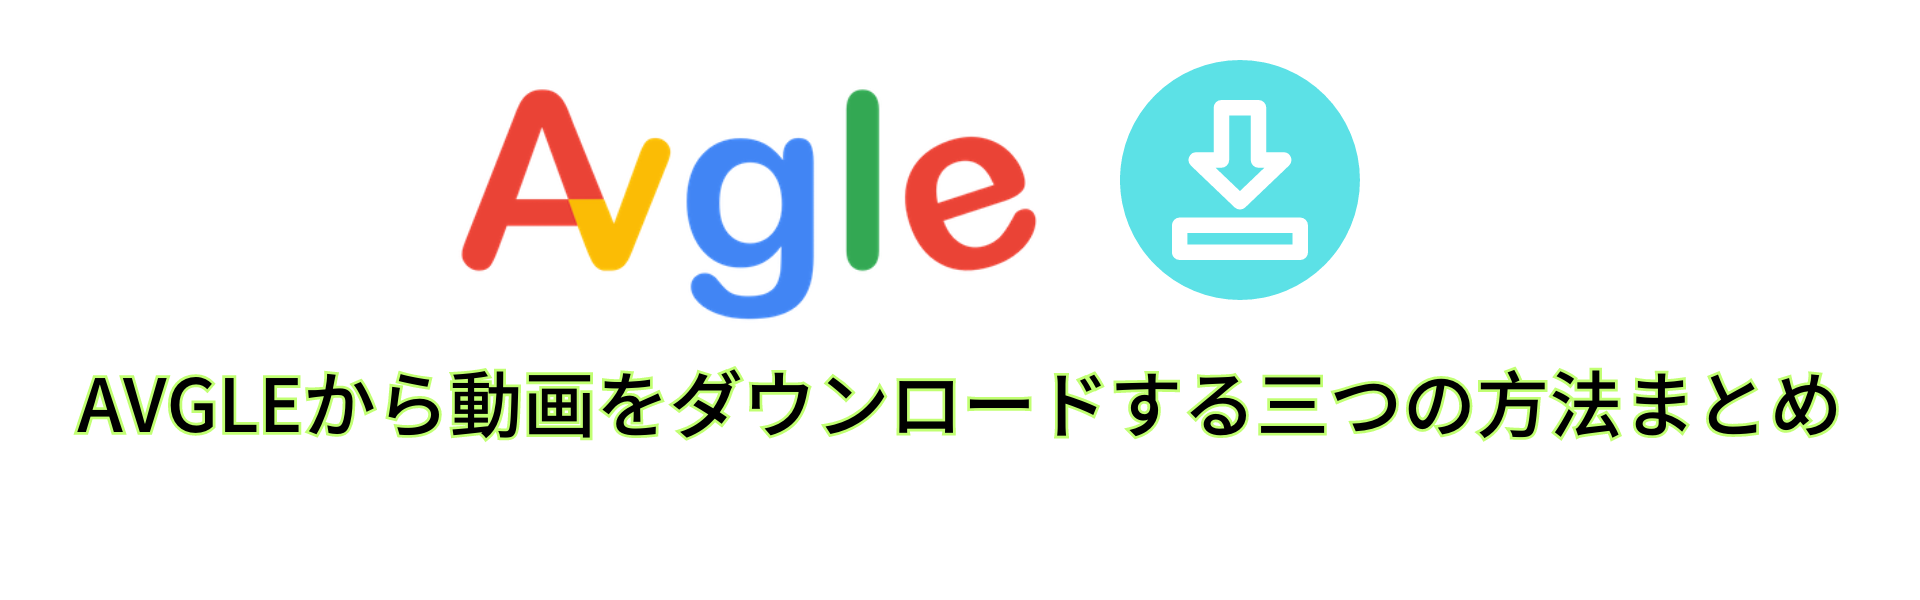 Avgle android ダウンロード アプリ